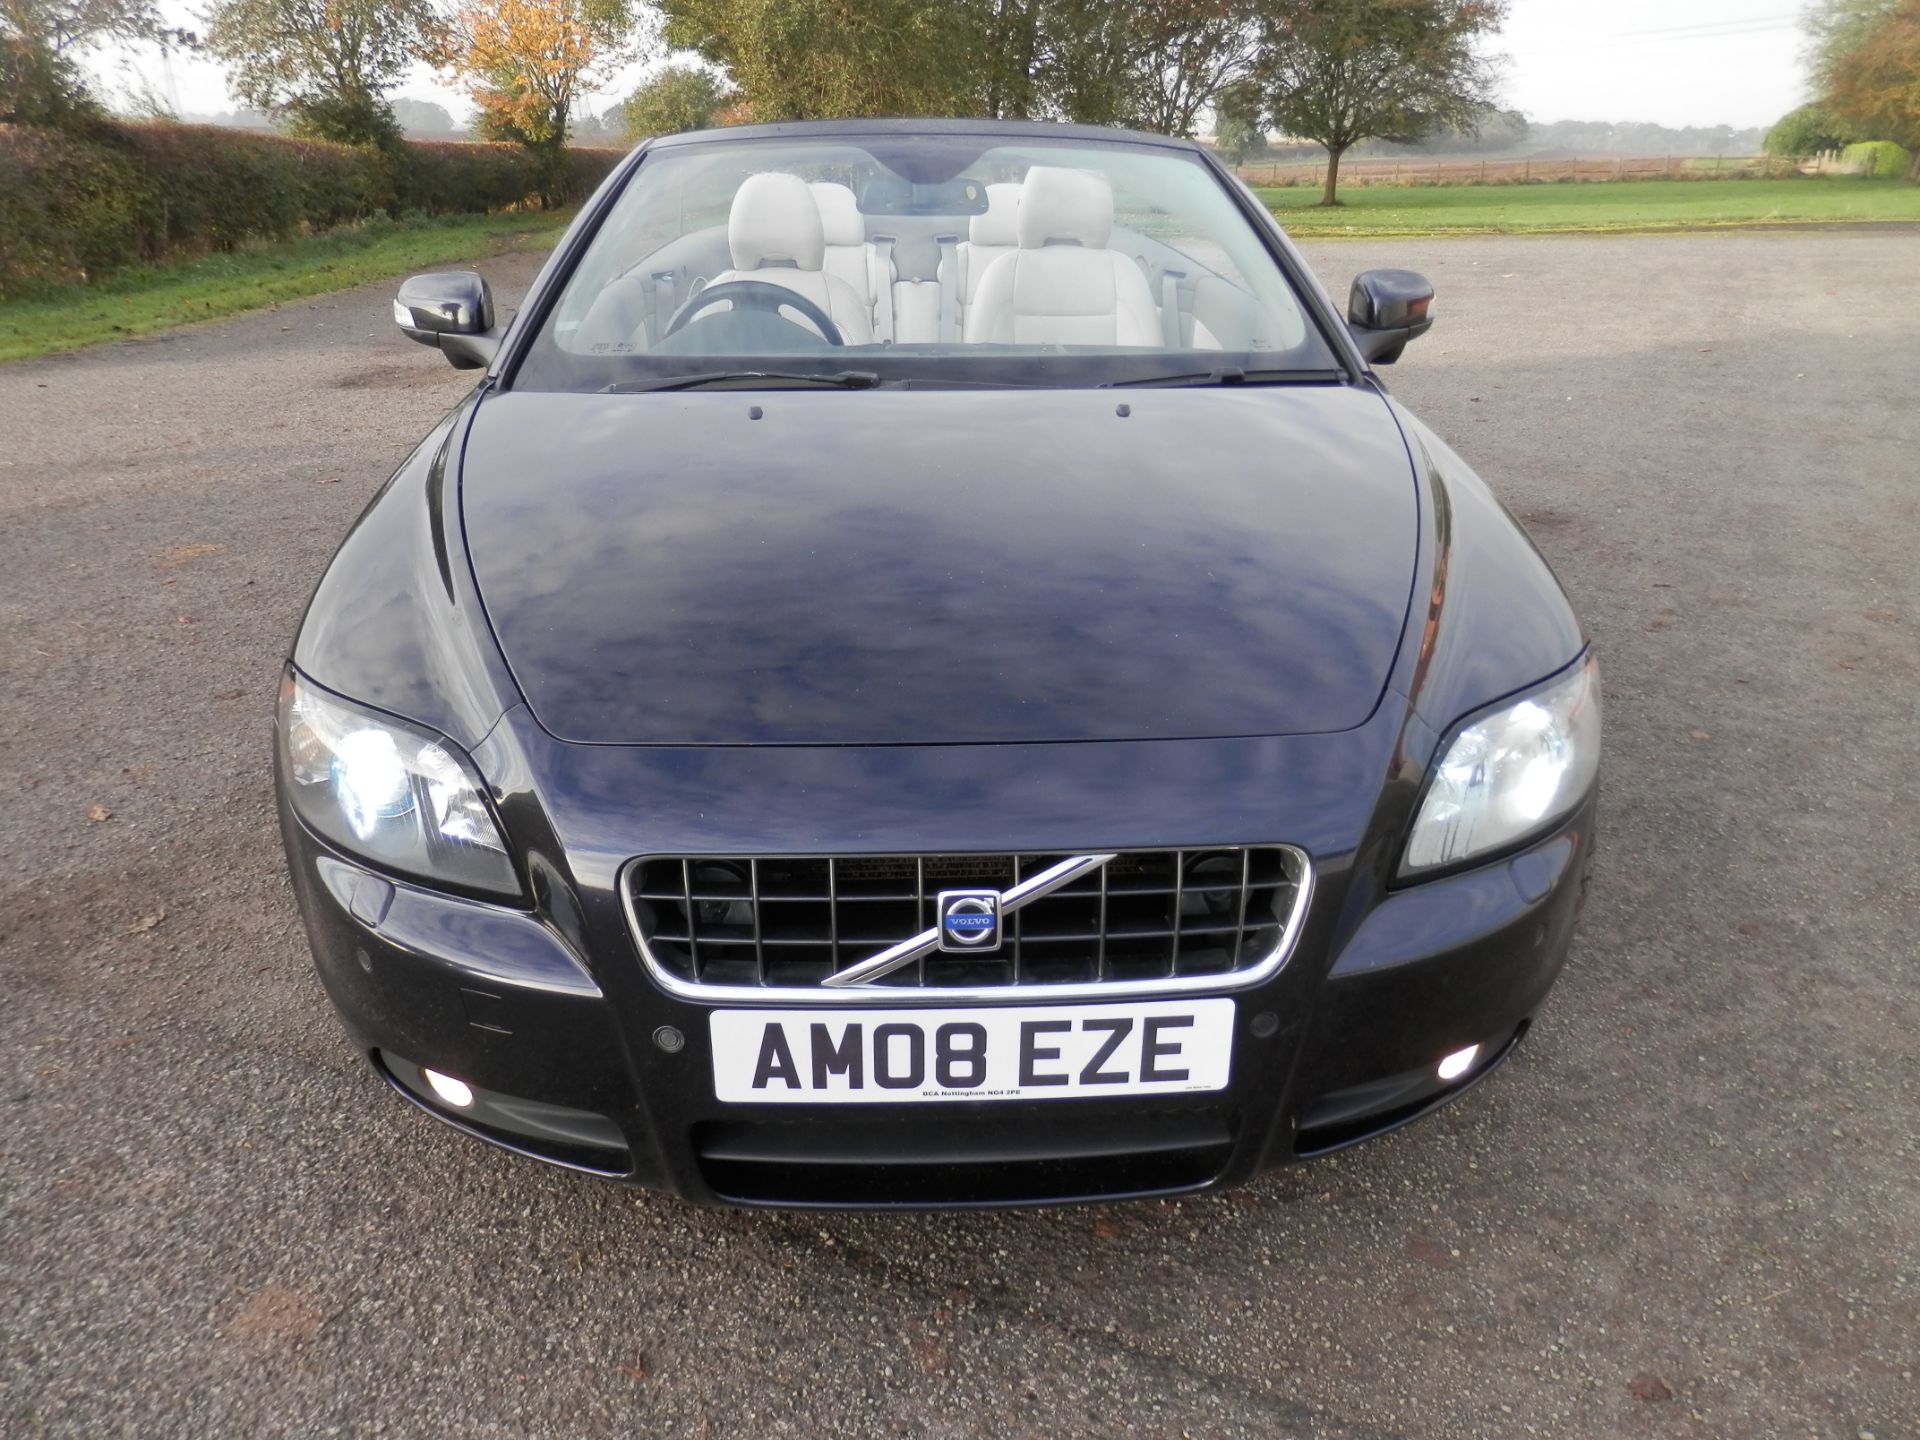 2008/08 VOLVO C70 SE LUX D5, DIESEL AUTO,CONVERTIBLE, MOT MAY 2017, ONLY 102K MILES, 180 BHP. - Image 13 of 57